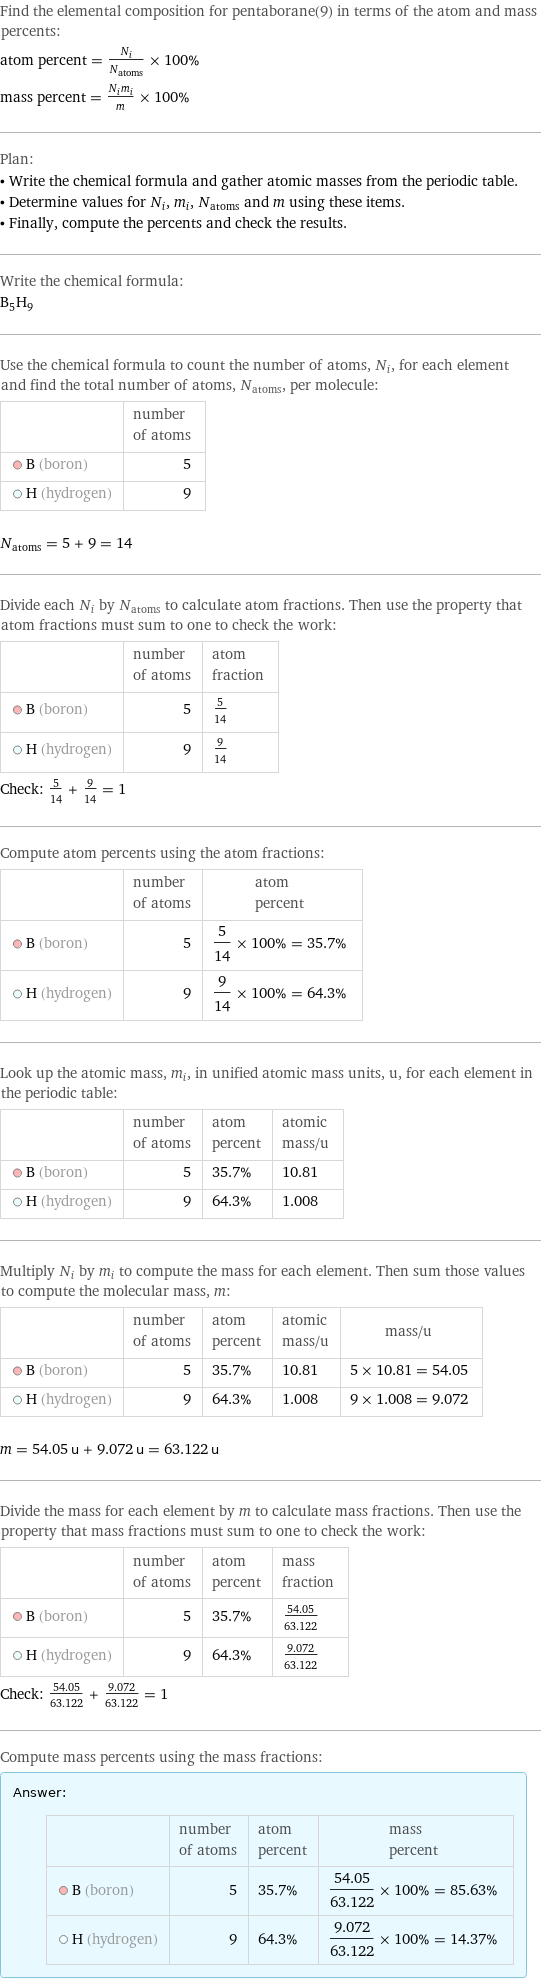 Find the elemental composition for pentaborane(9) in terms of the atom and mass percents: atom percent = N_i/N_atoms × 100% mass percent = (N_im_i)/m × 100% Plan: • Write the chemical formula and gather atomic masses from the periodic table. • Determine values for N_i, m_i, N_atoms and m using these items. • Finally, compute the percents and check the results. Write the chemical formula: B_5H_9 Use the chemical formula to count the number of atoms, N_i, for each element and find the total number of atoms, N_atoms, per molecule:  | number of atoms  B (boron) | 5  H (hydrogen) | 9  N_atoms = 5 + 9 = 14 Divide each N_i by N_atoms to calculate atom fractions. Then use the property that atom fractions must sum to one to check the work:  | number of atoms | atom fraction  B (boron) | 5 | 5/14  H (hydrogen) | 9 | 9/14 Check: 5/14 + 9/14 = 1 Compute atom percents using the atom fractions:  | number of atoms | atom percent  B (boron) | 5 | 5/14 × 100% = 35.7%  H (hydrogen) | 9 | 9/14 × 100% = 64.3% Look up the atomic mass, m_i, in unified atomic mass units, u, for each element in the periodic table:  | number of atoms | atom percent | atomic mass/u  B (boron) | 5 | 35.7% | 10.81  H (hydrogen) | 9 | 64.3% | 1.008 Multiply N_i by m_i to compute the mass for each element. Then sum those values to compute the molecular mass, m:  | number of atoms | atom percent | atomic mass/u | mass/u  B (boron) | 5 | 35.7% | 10.81 | 5 × 10.81 = 54.05  H (hydrogen) | 9 | 64.3% | 1.008 | 9 × 1.008 = 9.072  m = 54.05 u + 9.072 u = 63.122 u Divide the mass for each element by m to calculate mass fractions. Then use the property that mass fractions must sum to one to check the work:  | number of atoms | atom percent | mass fraction  B (boron) | 5 | 35.7% | 54.05/63.122  H (hydrogen) | 9 | 64.3% | 9.072/63.122 Check: 54.05/63.122 + 9.072/63.122 = 1 Compute mass percents using the mass fractions: Answer: |   | | number of atoms | atom percent | mass percent  B (boron) | 5 | 35.7% | 54.05/63.122 × 100% = 85.63%  H (hydrogen) | 9 | 64.3% | 9.072/63.122 × 100% = 14.37%